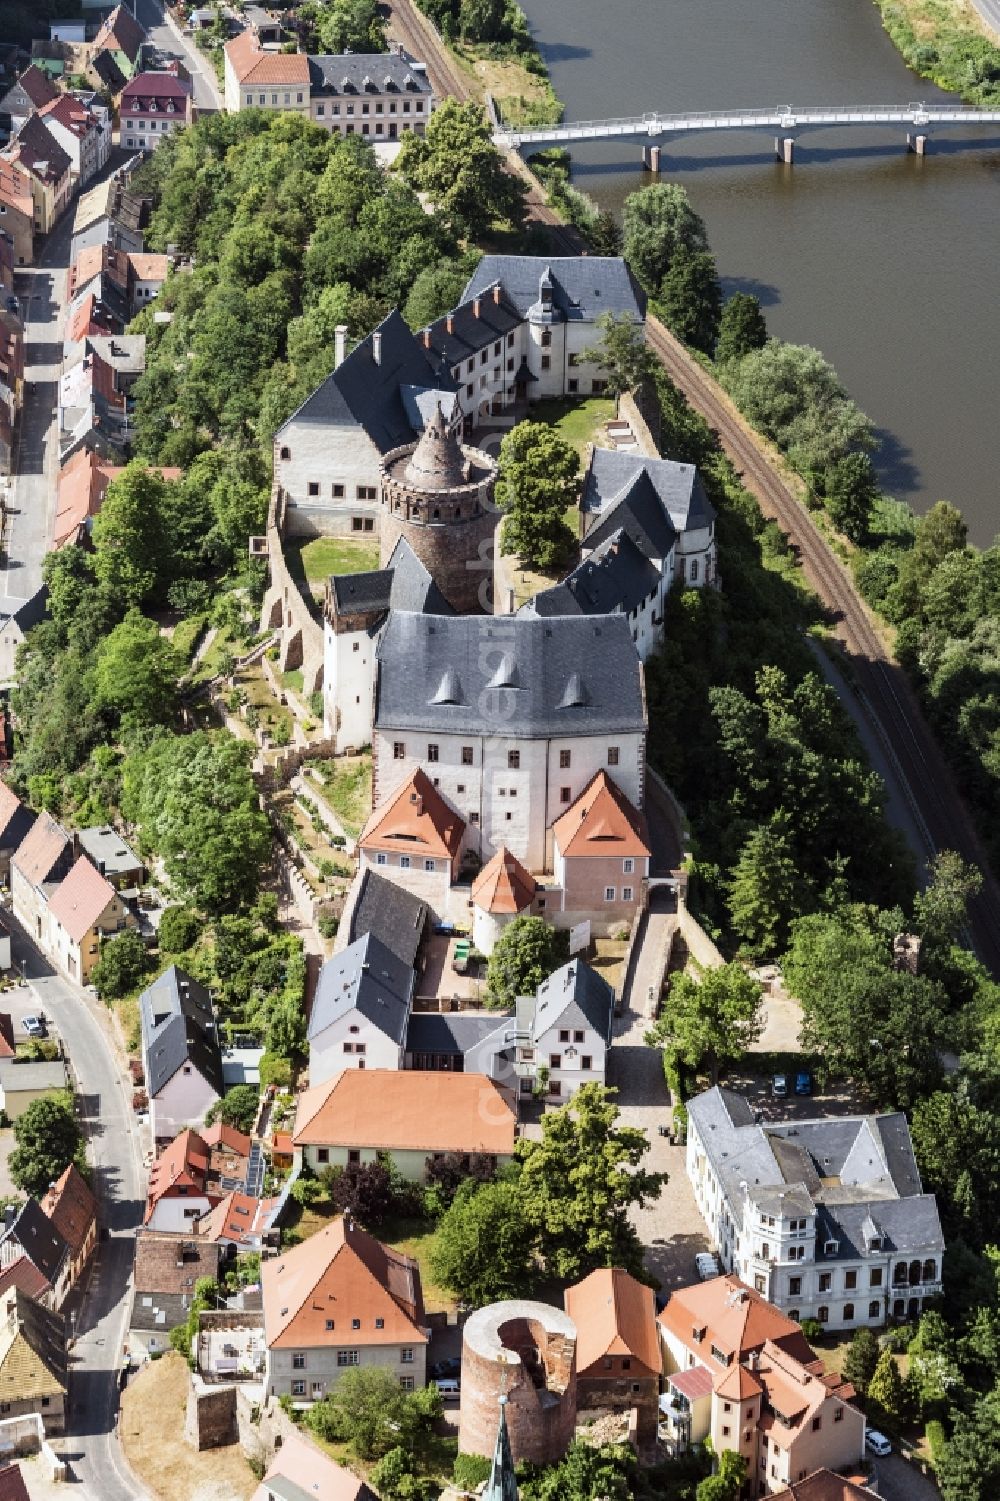 Leisnig from the bird's eye view: View of the castle Mildenstein in Leisnig in Saxony. The castle, which was built in the 10th Century, is the property of the Free State of Saxony and is administered by the state enterprise State Palaces, Castles and Gardens of Saxony. The hill fort has been used since 1890 as a museum by the Leisniger history and ancient society